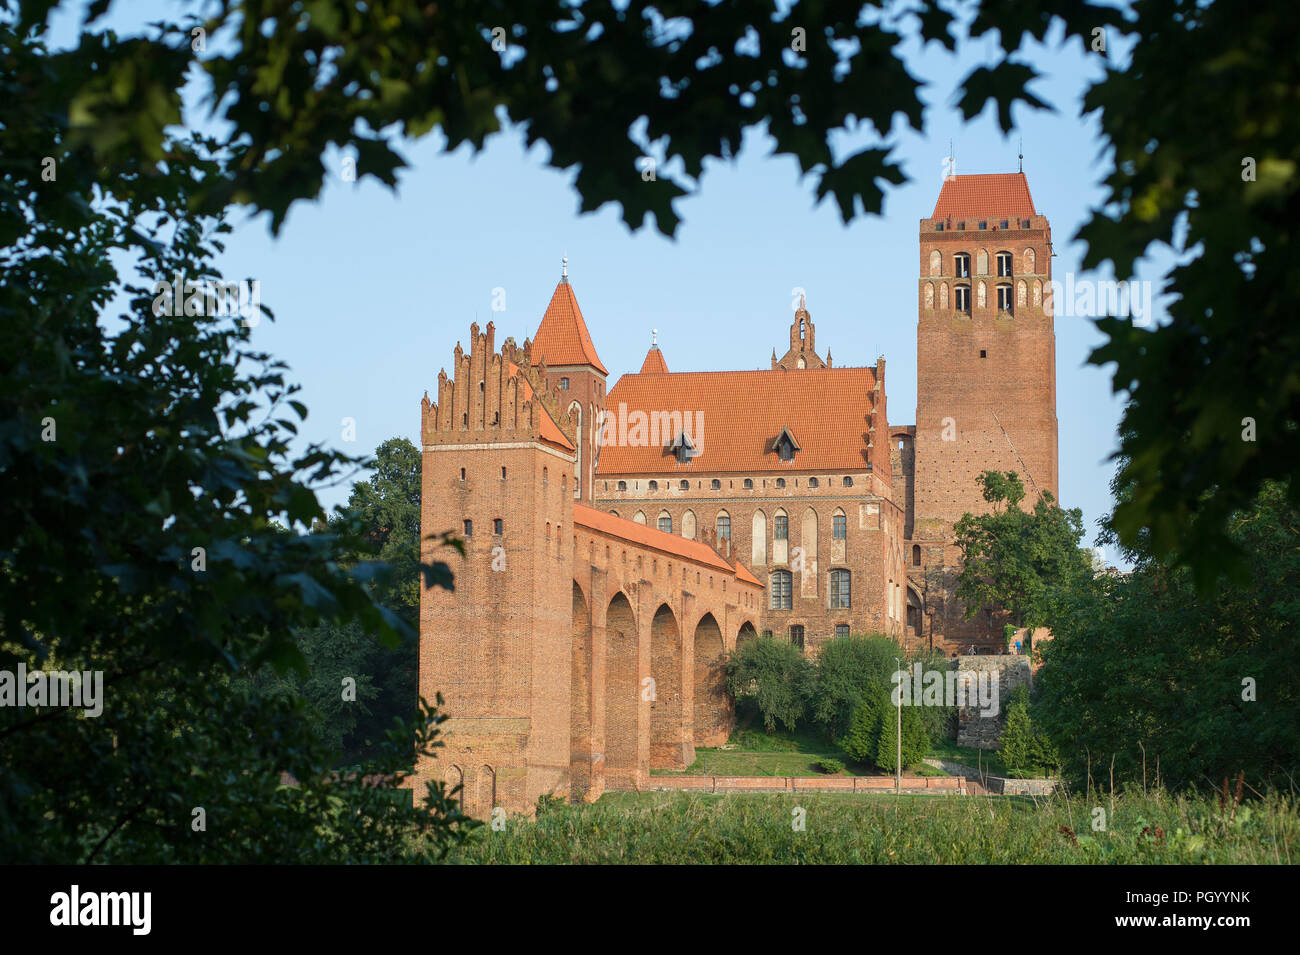 Brick Gothic gdanisko (dansker) of Brick Gothic castle a chapter house of Bishopric of Pomesania built in Teutonic Order castle architecture style and Stock Photo